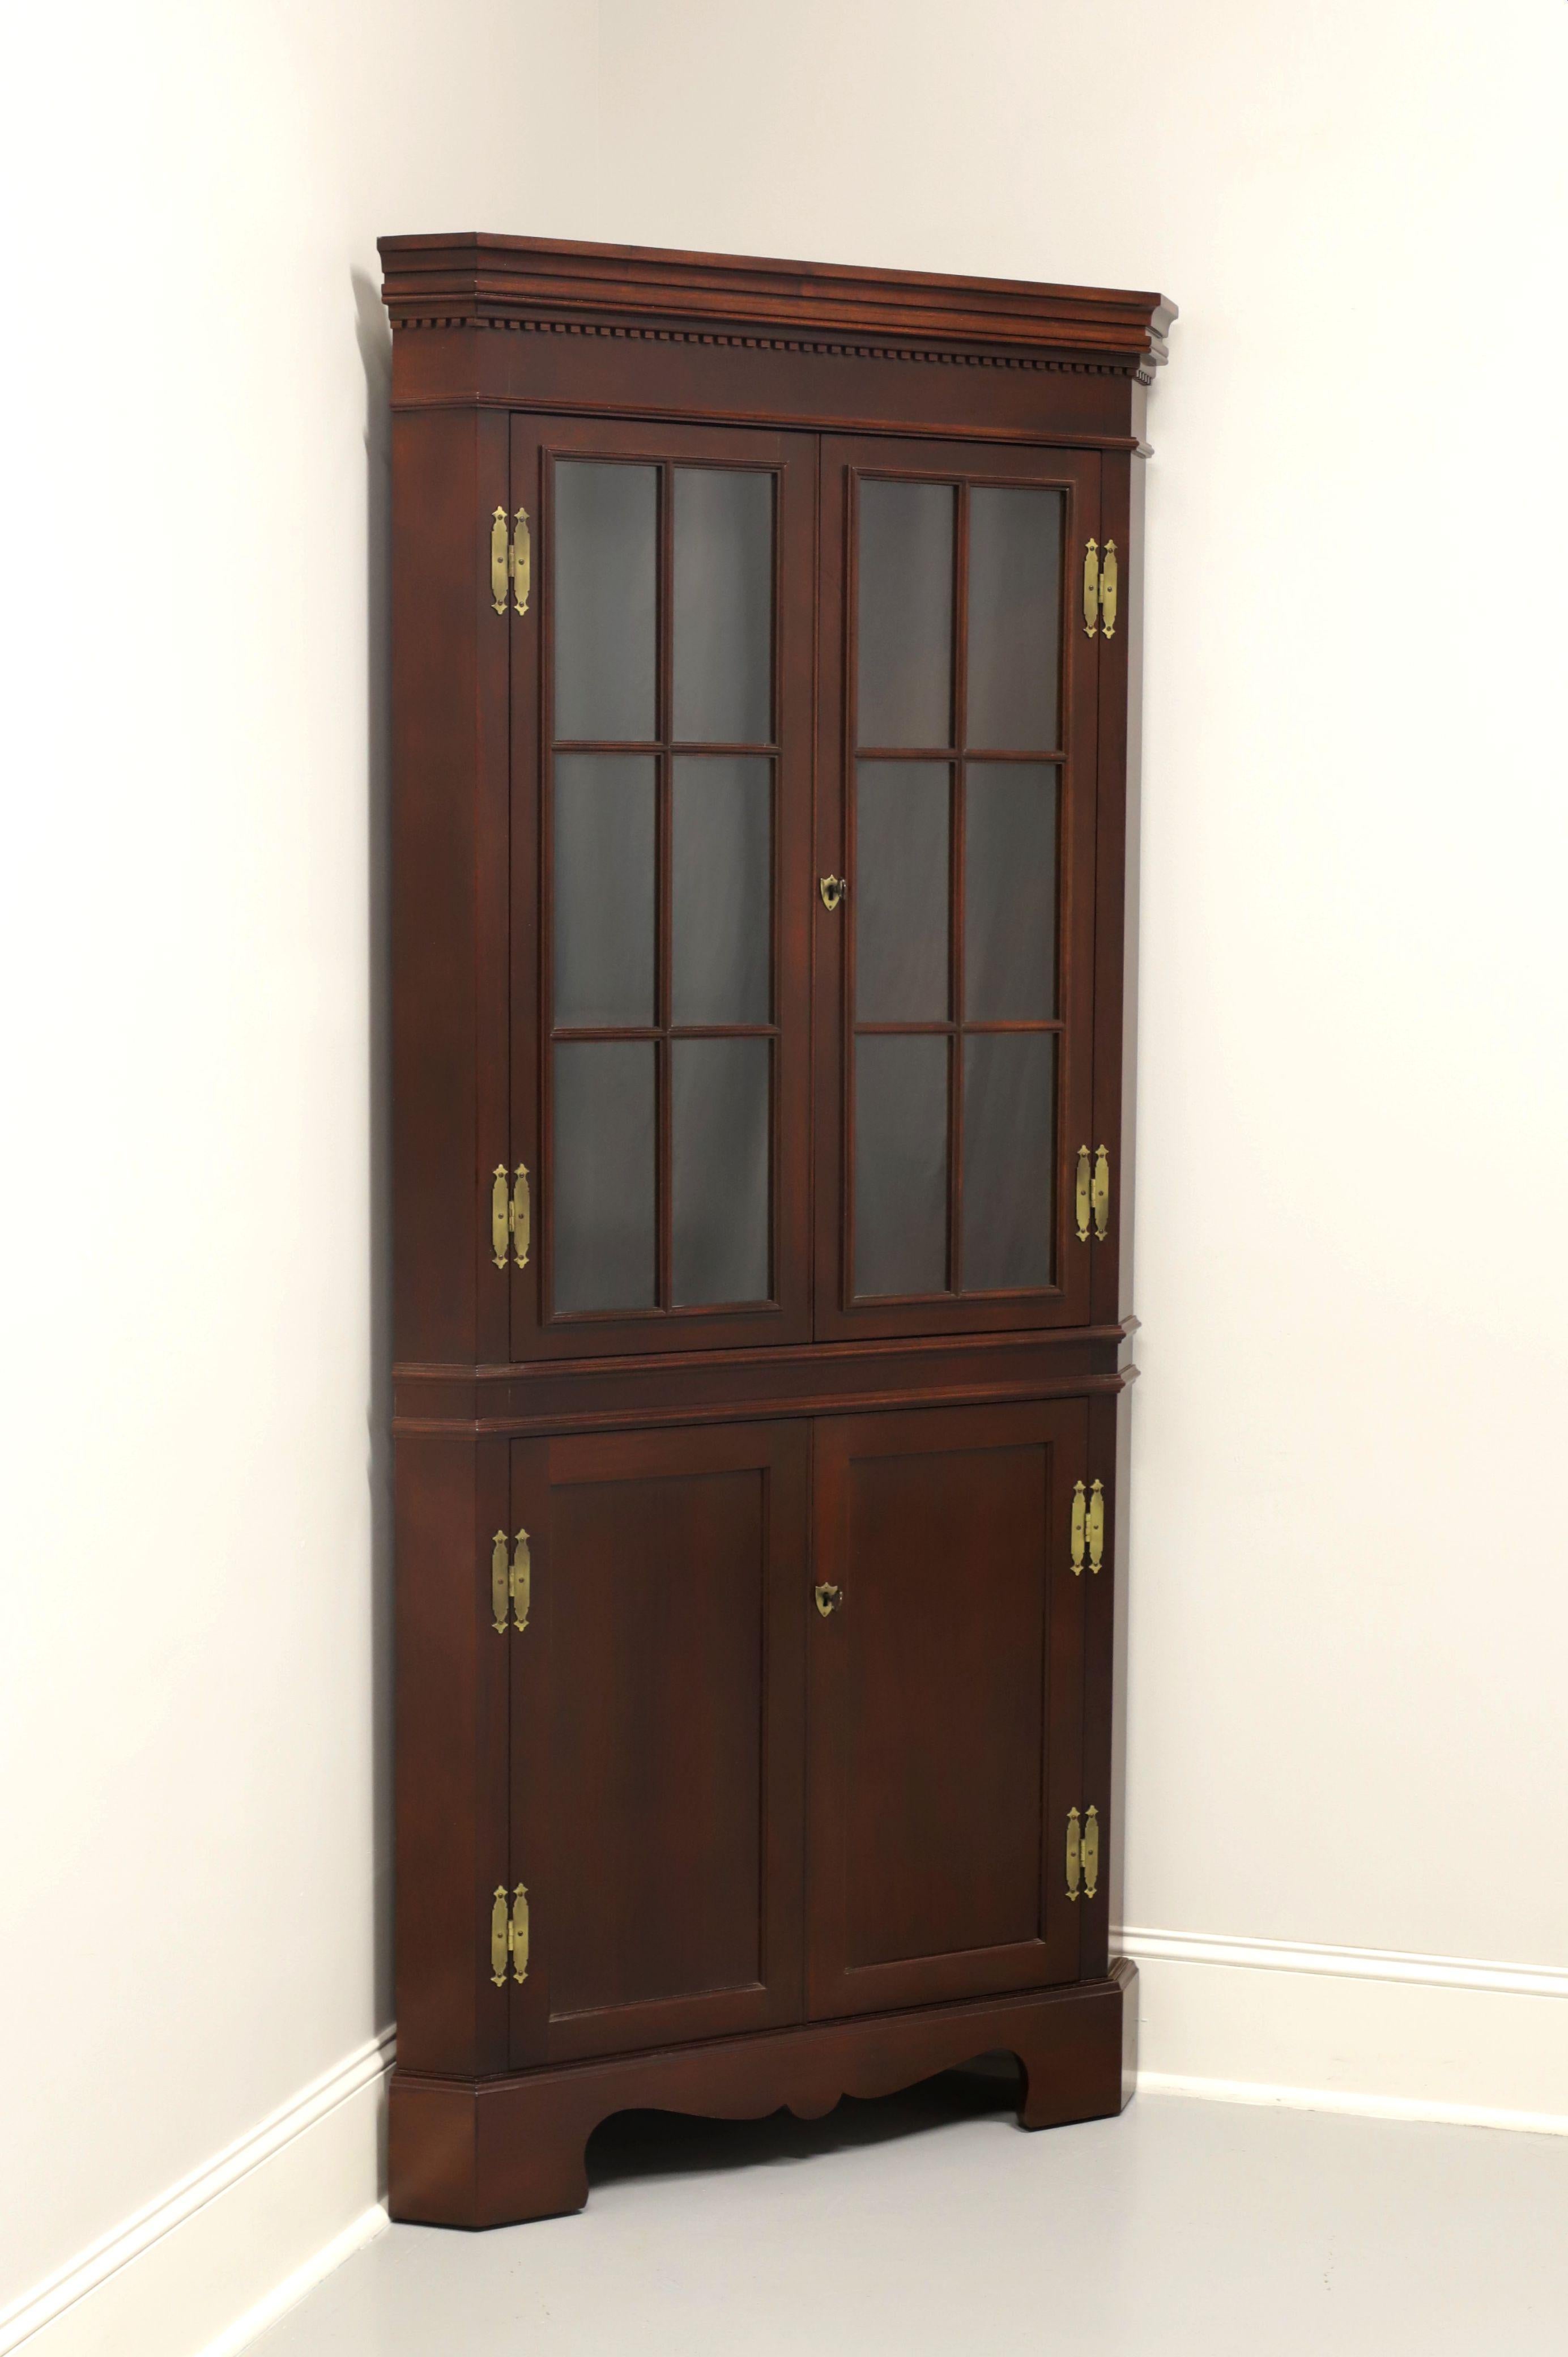 CRAFTIQUE Solid Mahogany Chippendale Style Corner Cupboard / Cabinet - A For Sale 3